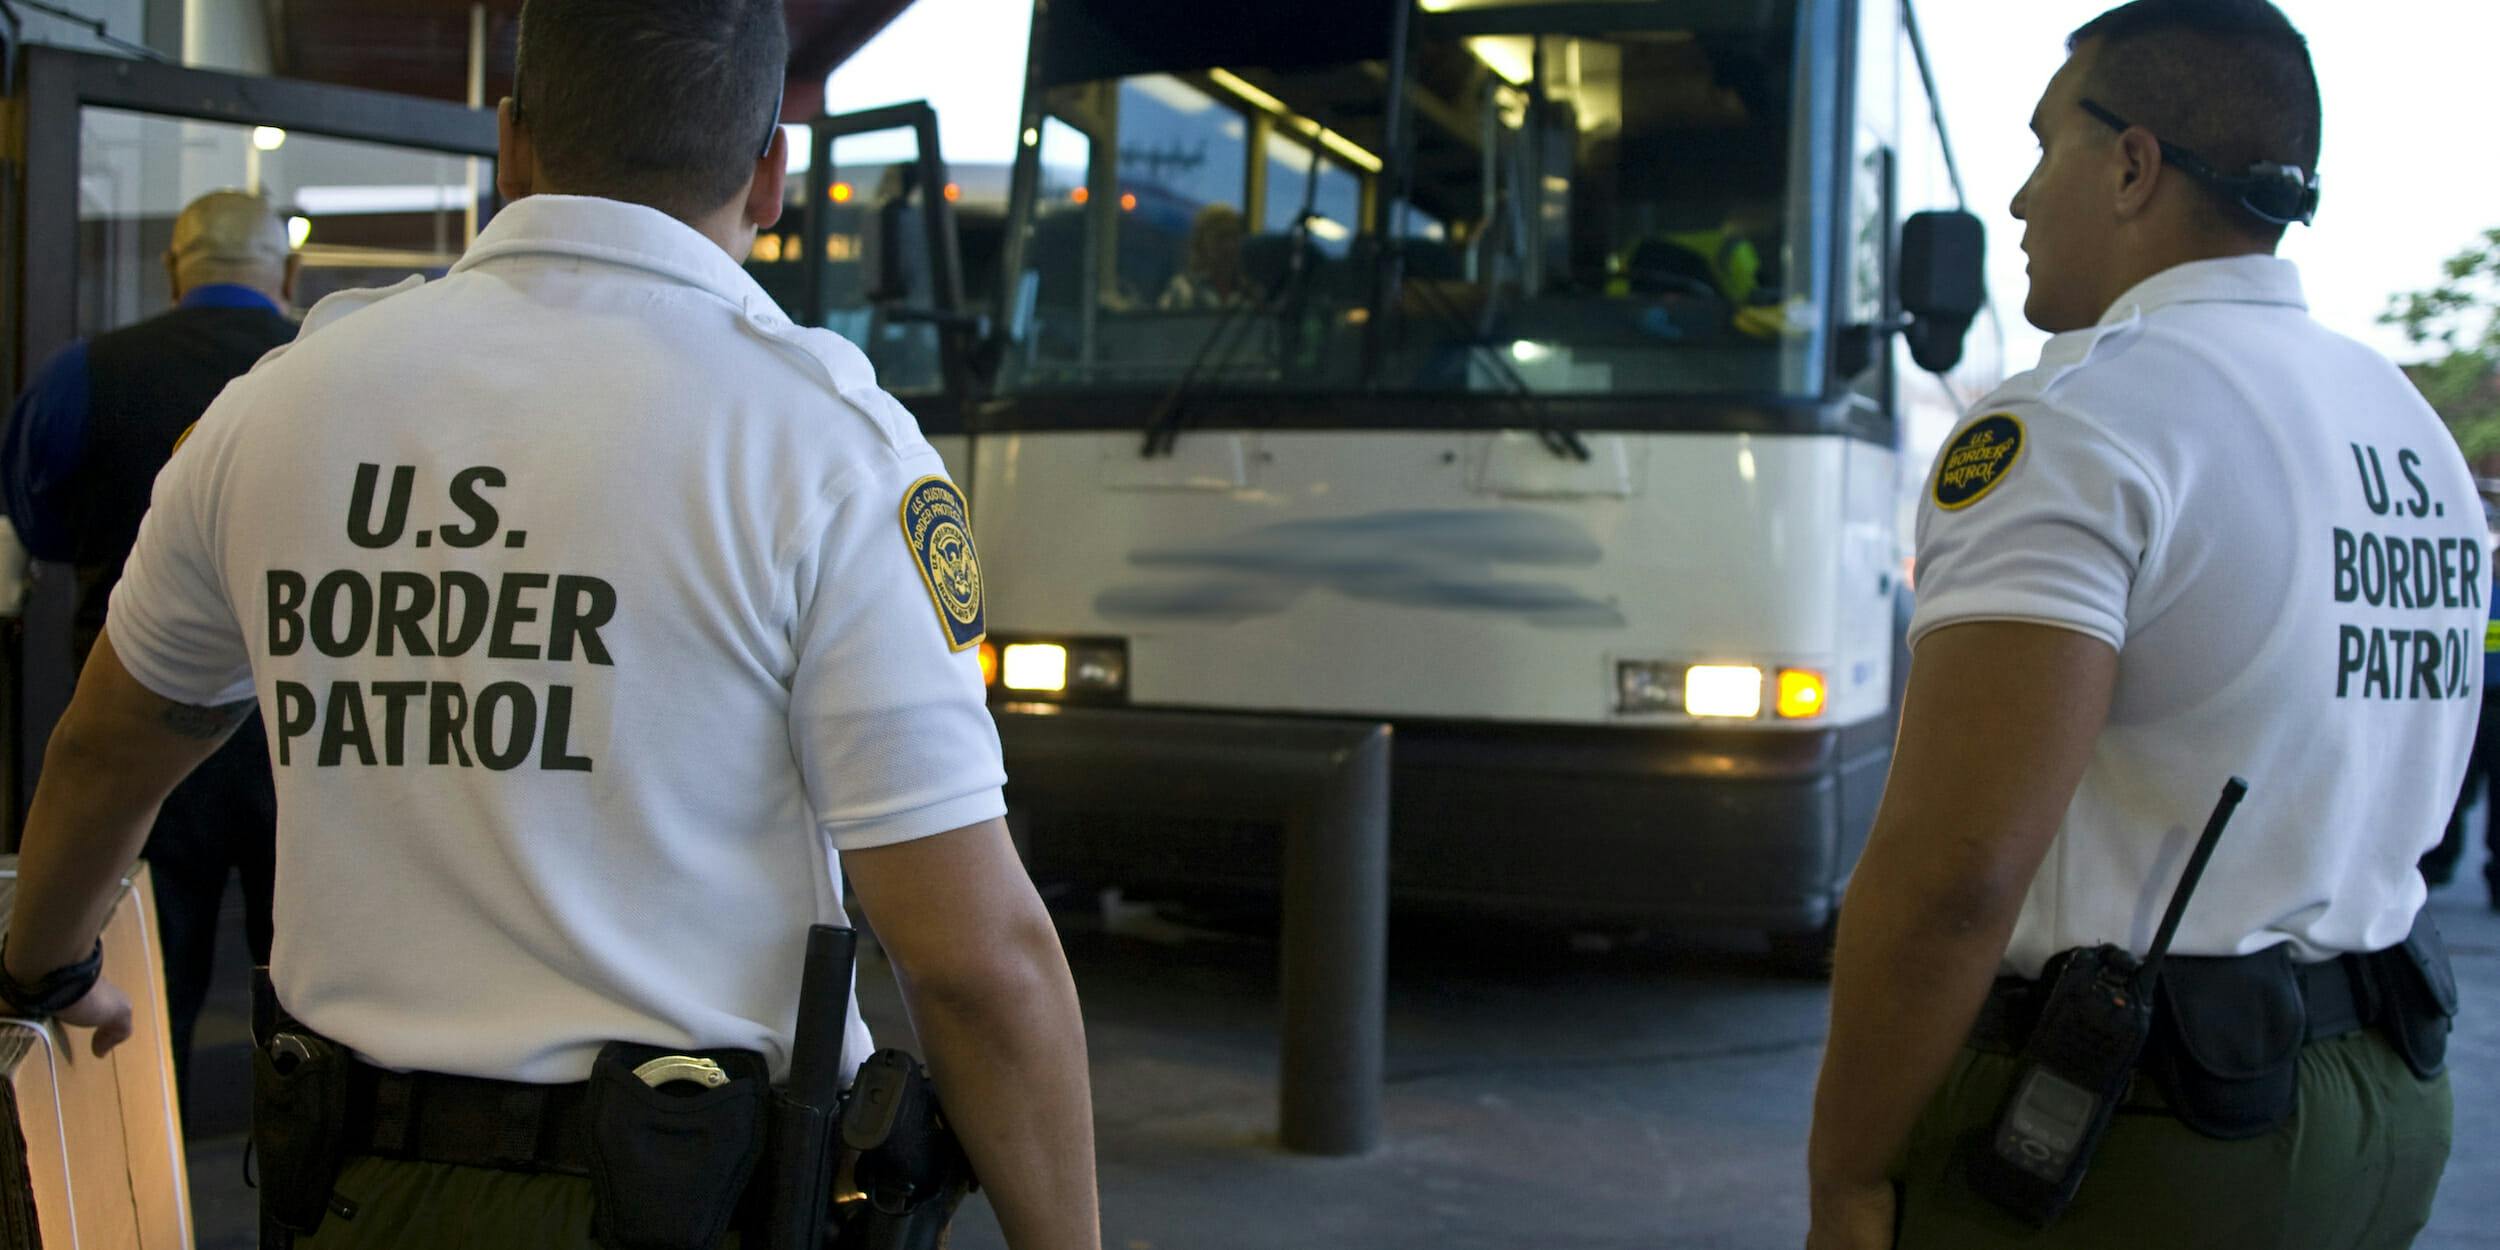 Customs officers await a greyhound bus for inspection in shirts reading: "U.S. Border Patrol."